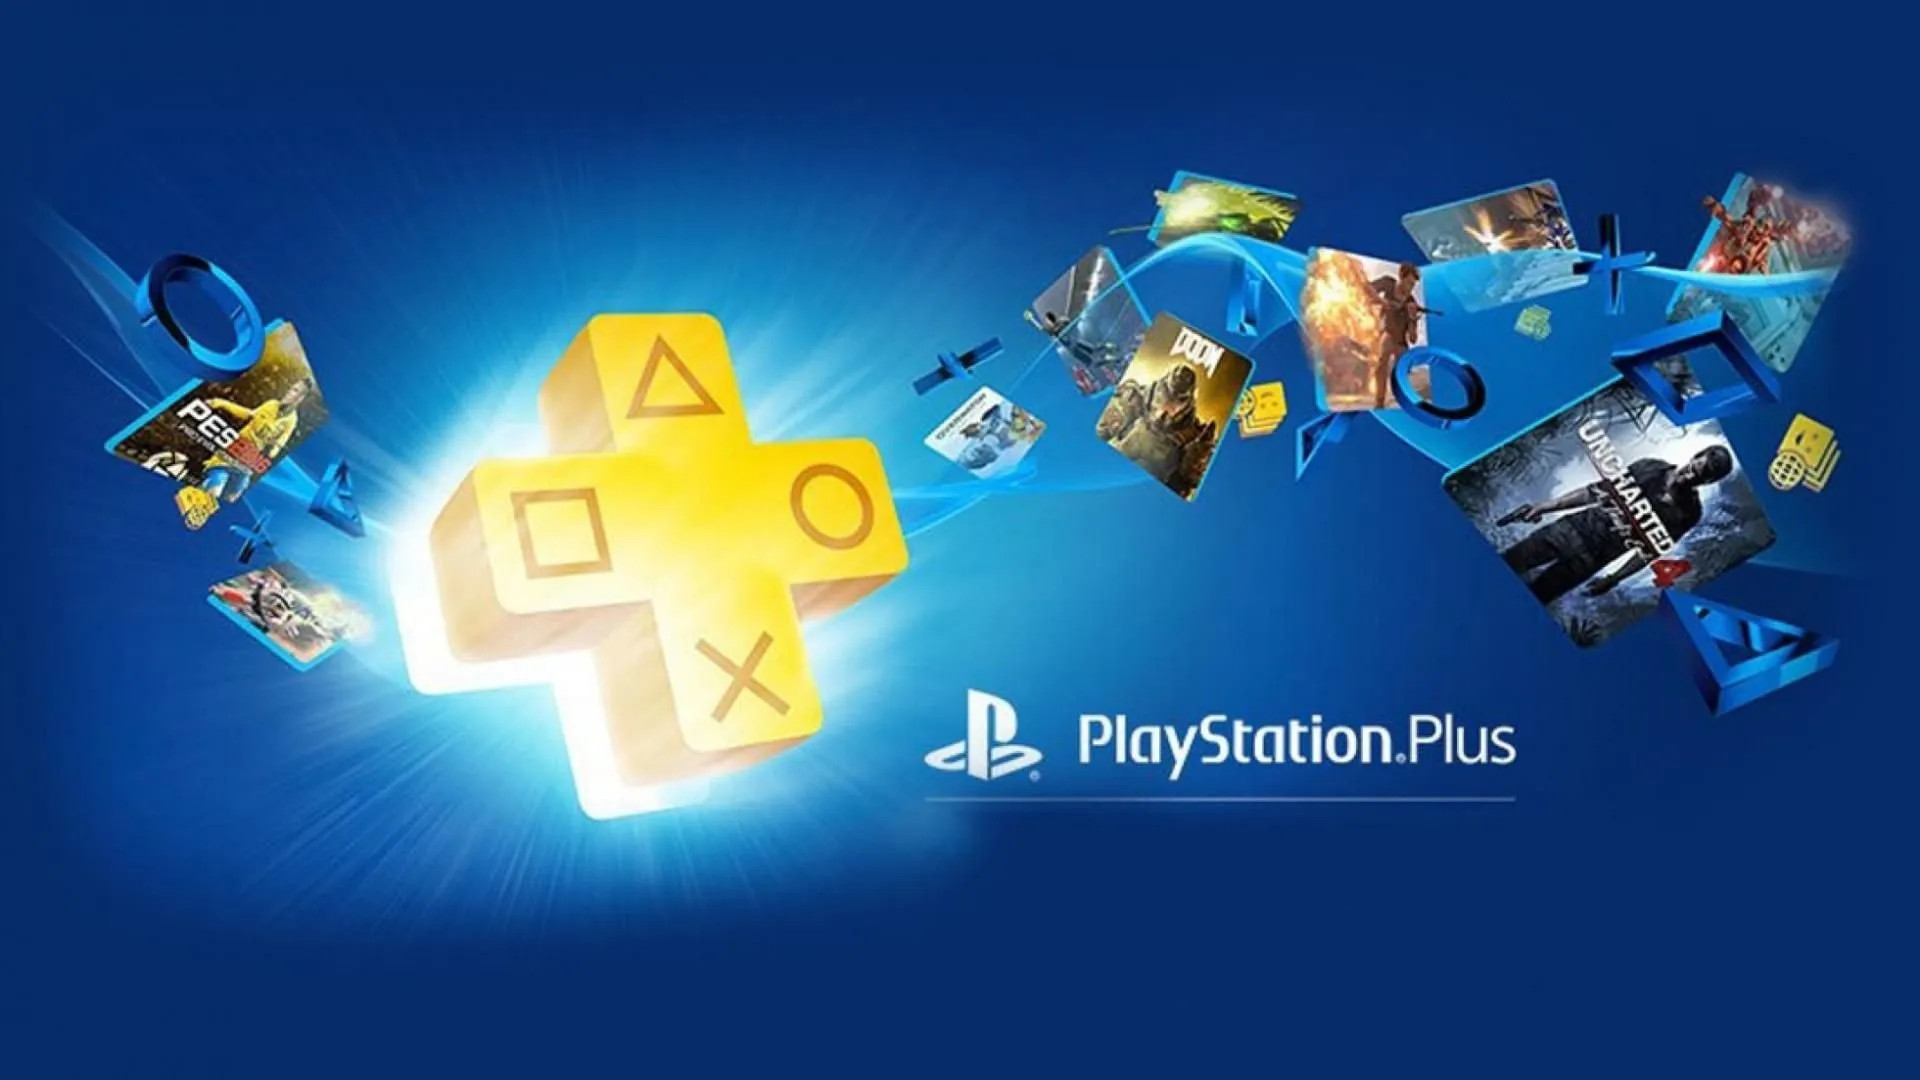 Take-Two CEO agrees with new PlayStation Plus not having day one releases